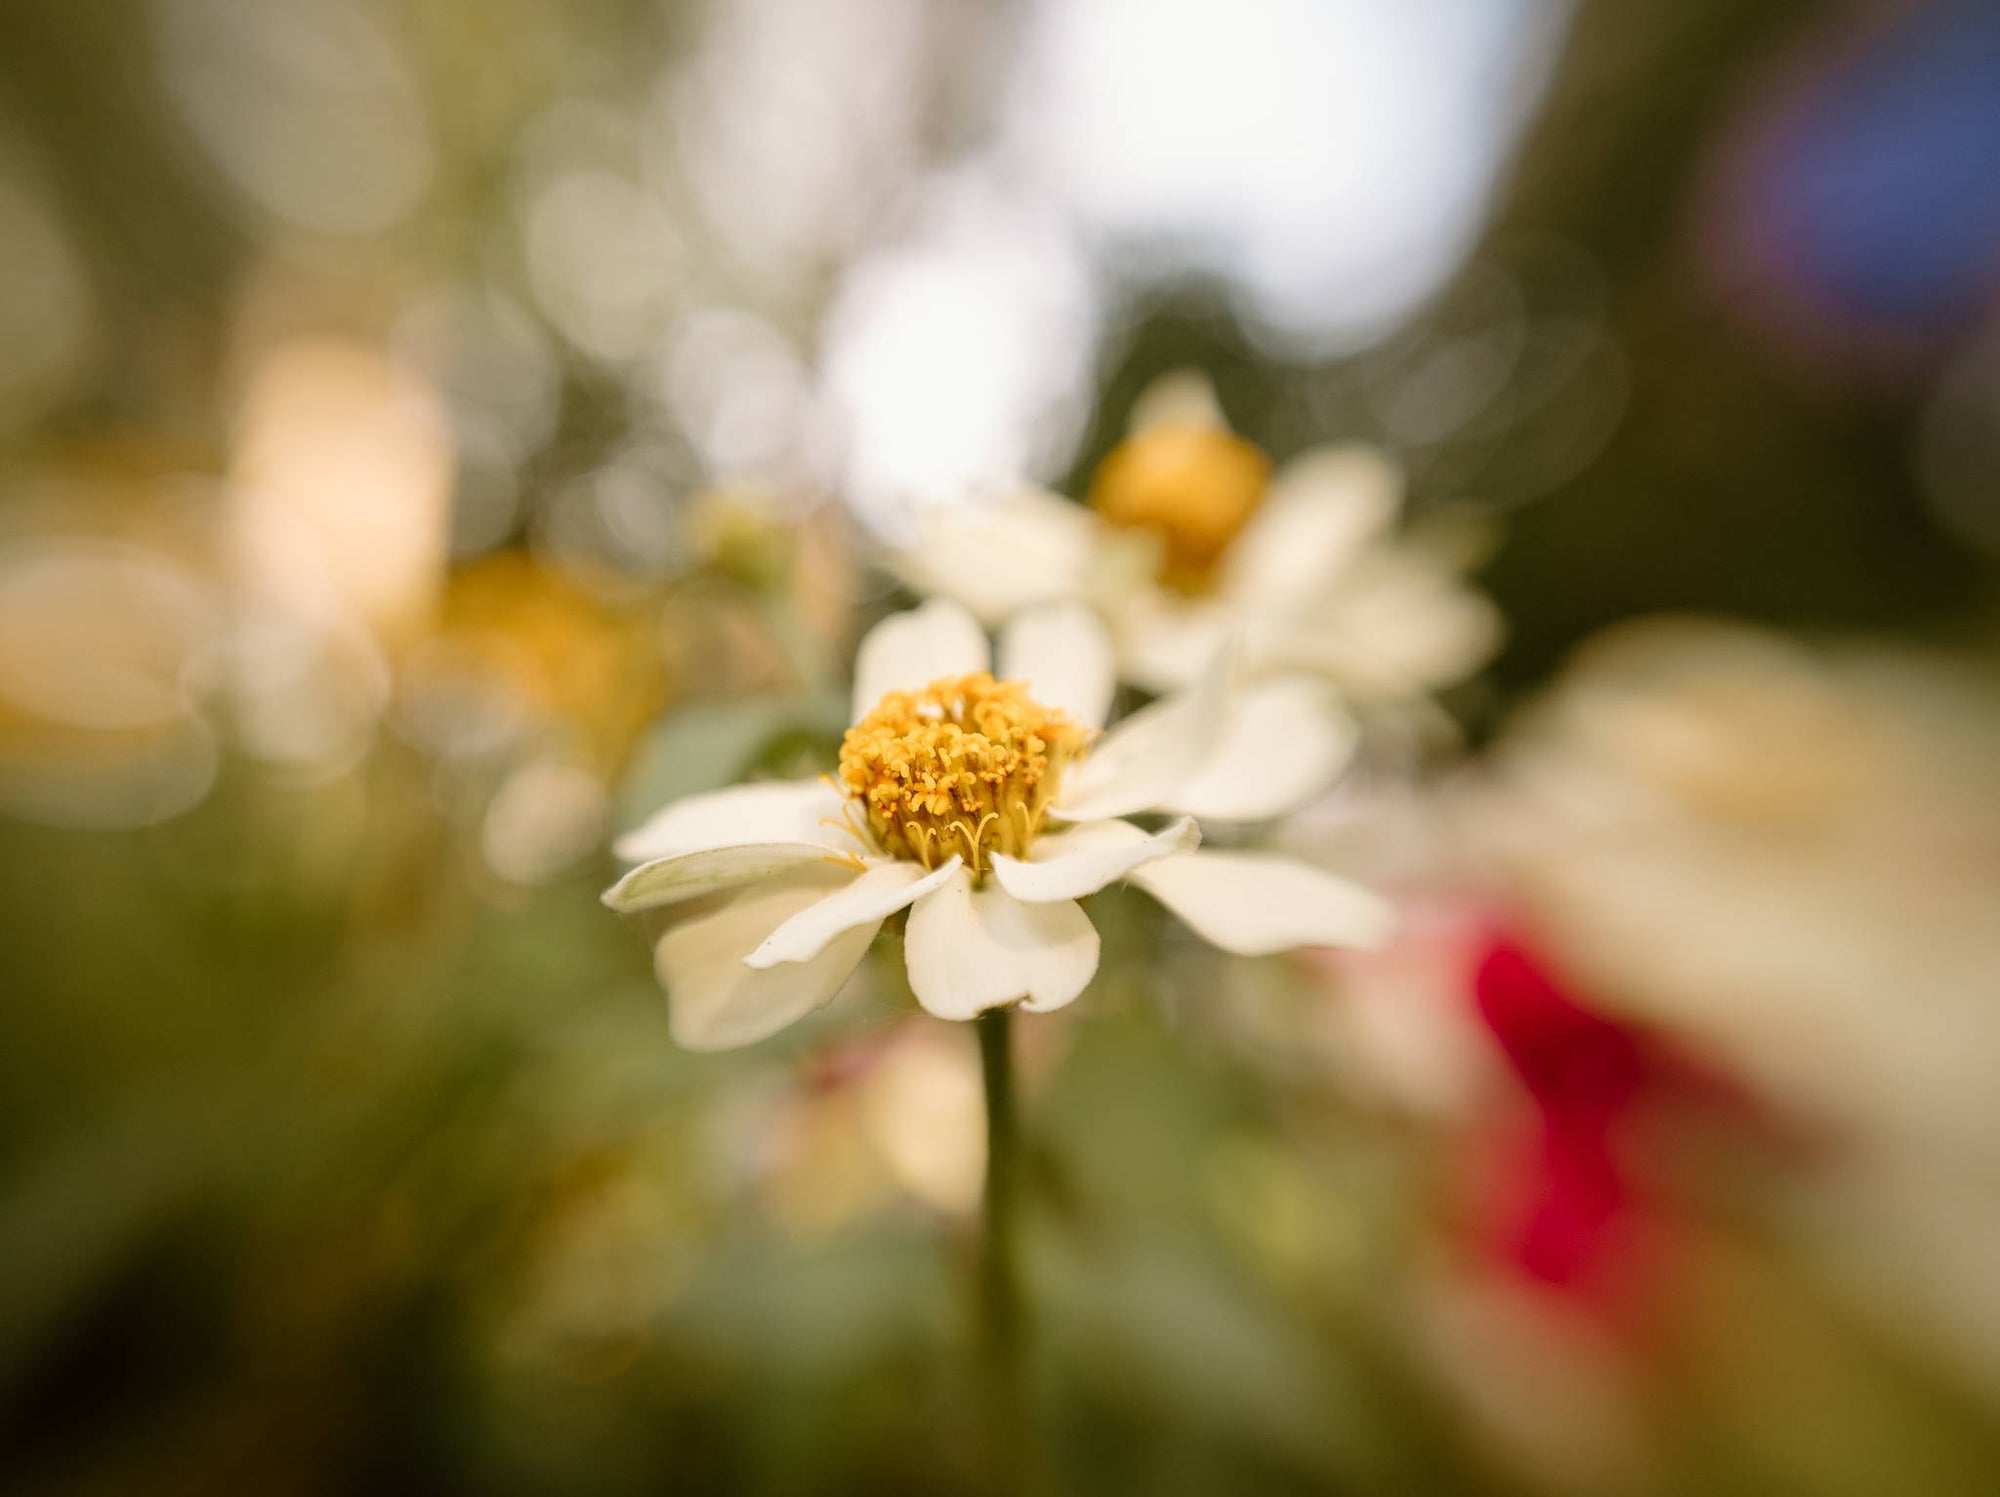 What’s So “Sweet” About The Lensbaby Sweet 22